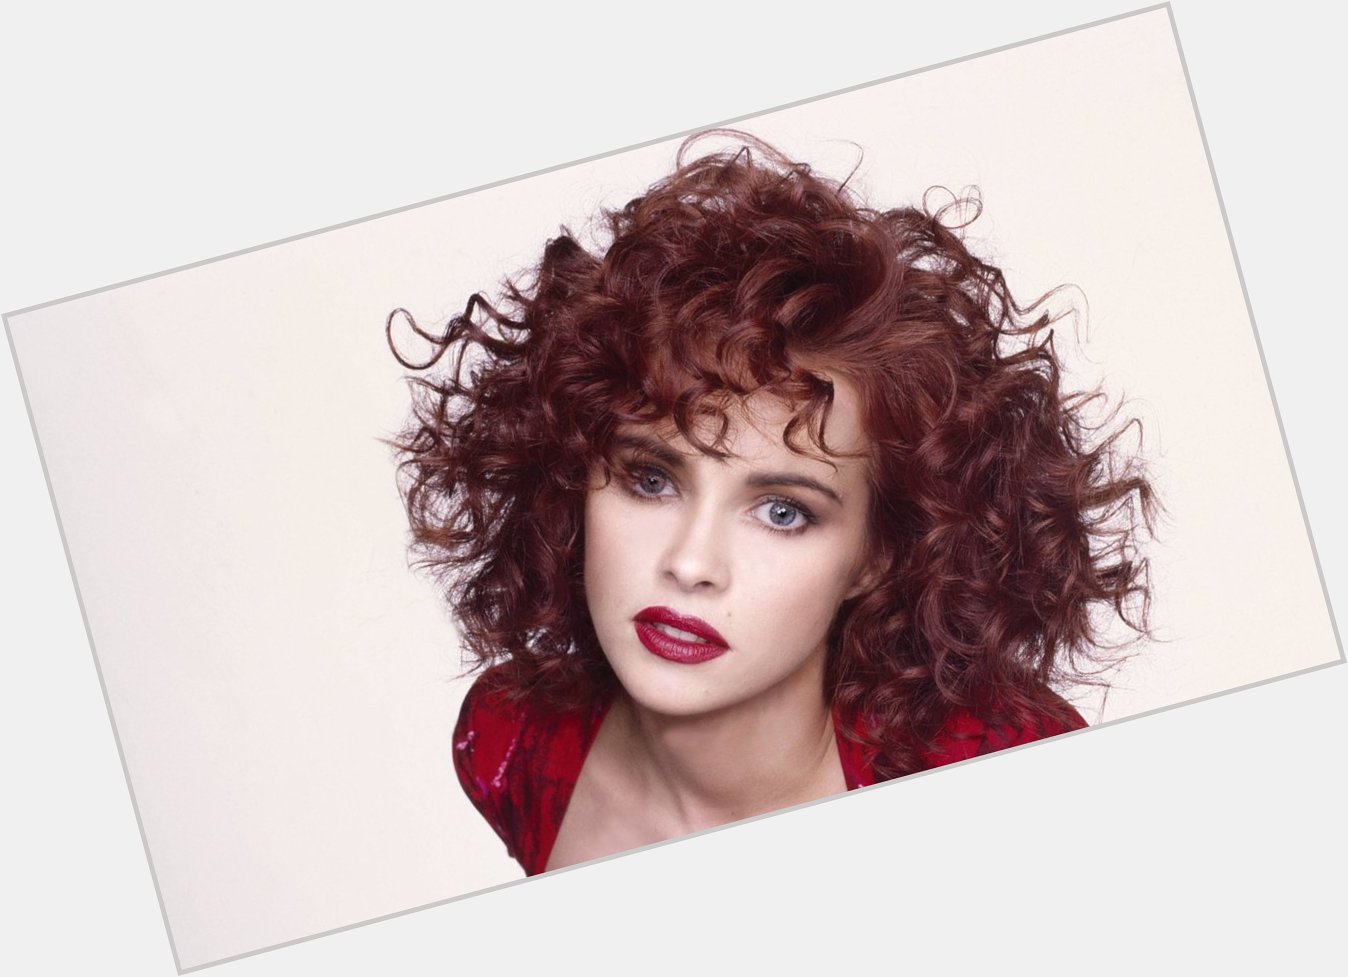 Please join me here at in wishing the one and only Sheena Easton a very Happy Birthday today  